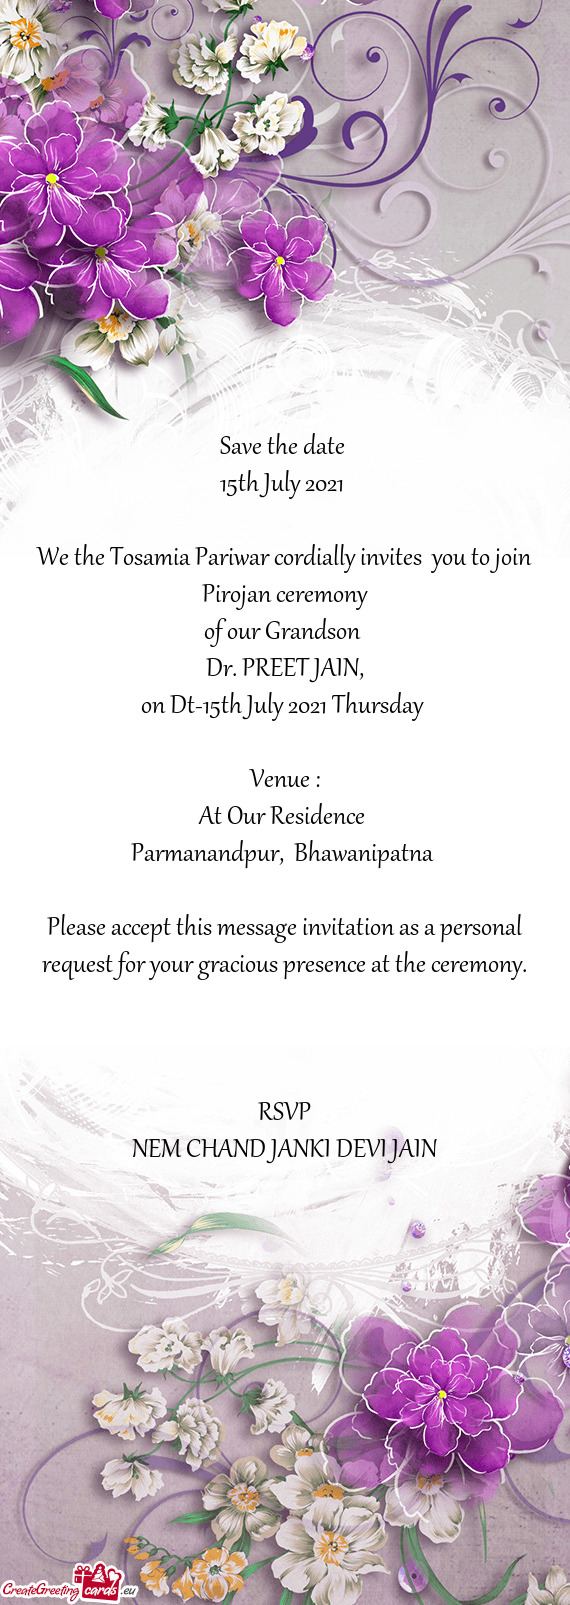 We the Tosamia Pariwar cordially invites you to join